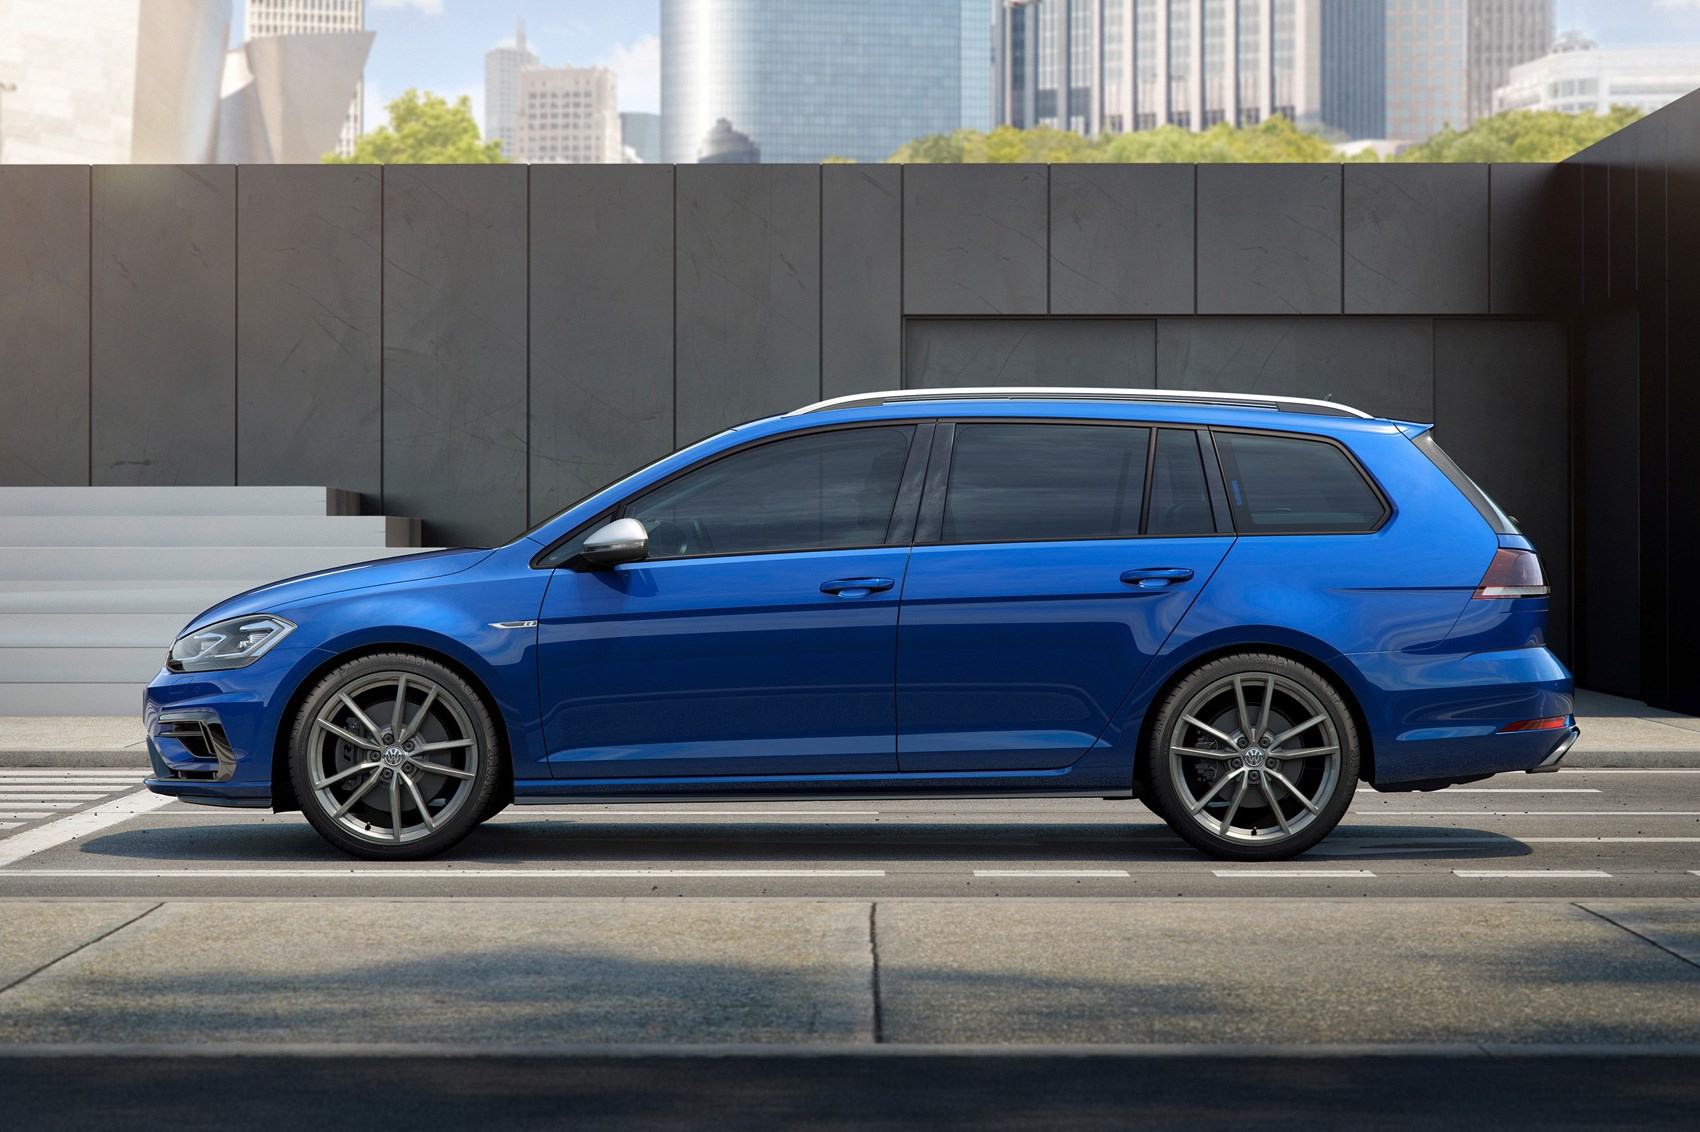 New(ish) VW Golf R for 2017: fast Golf gets a facelift